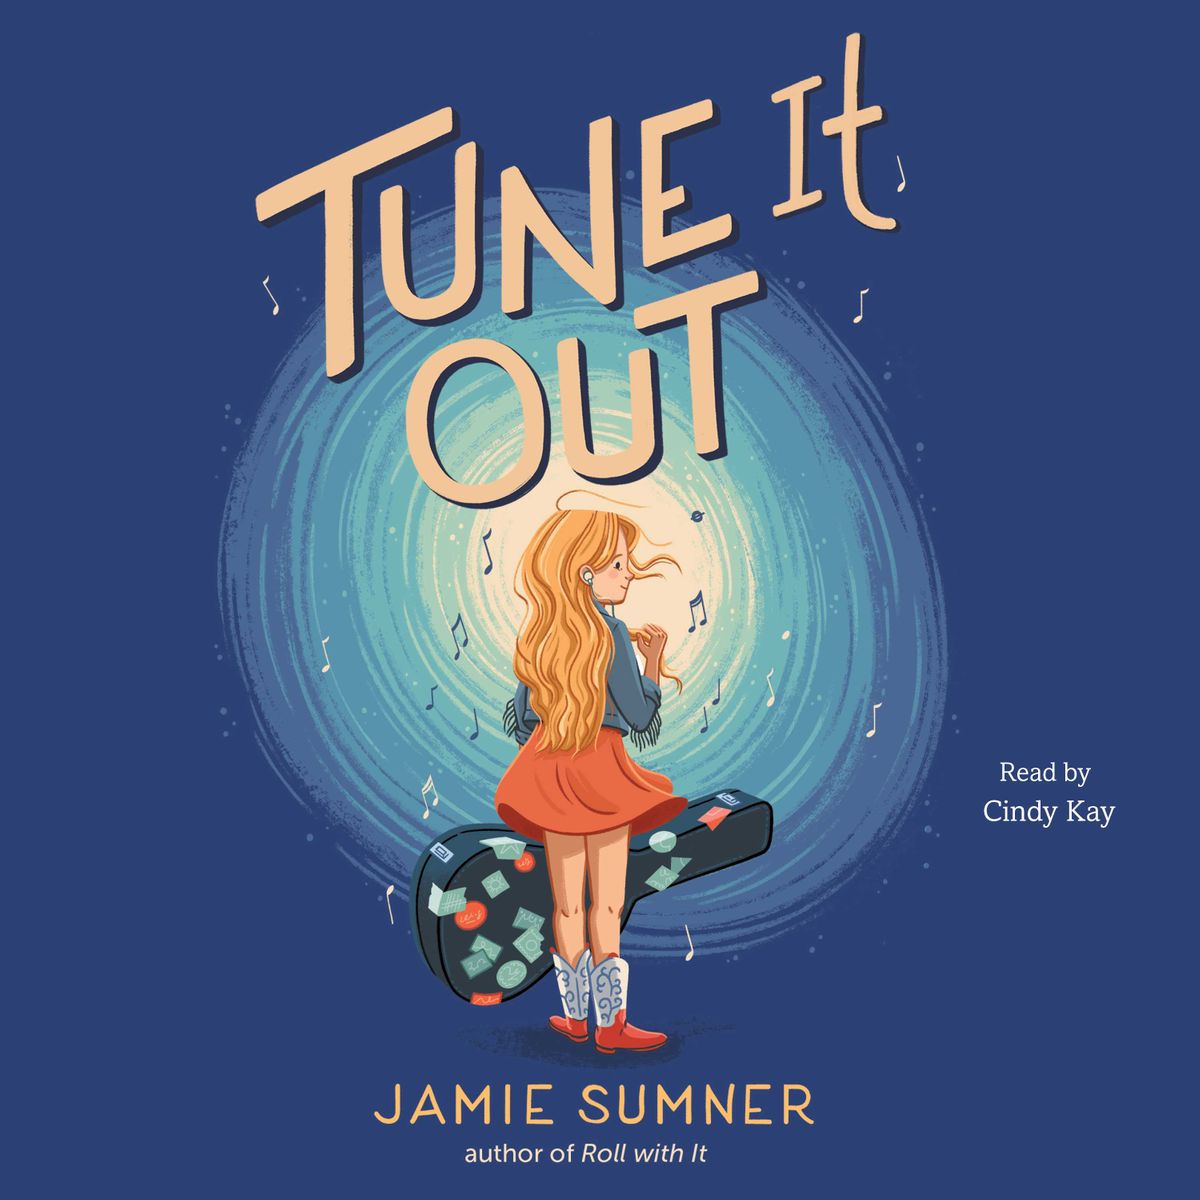 Image of "Tune It Out"